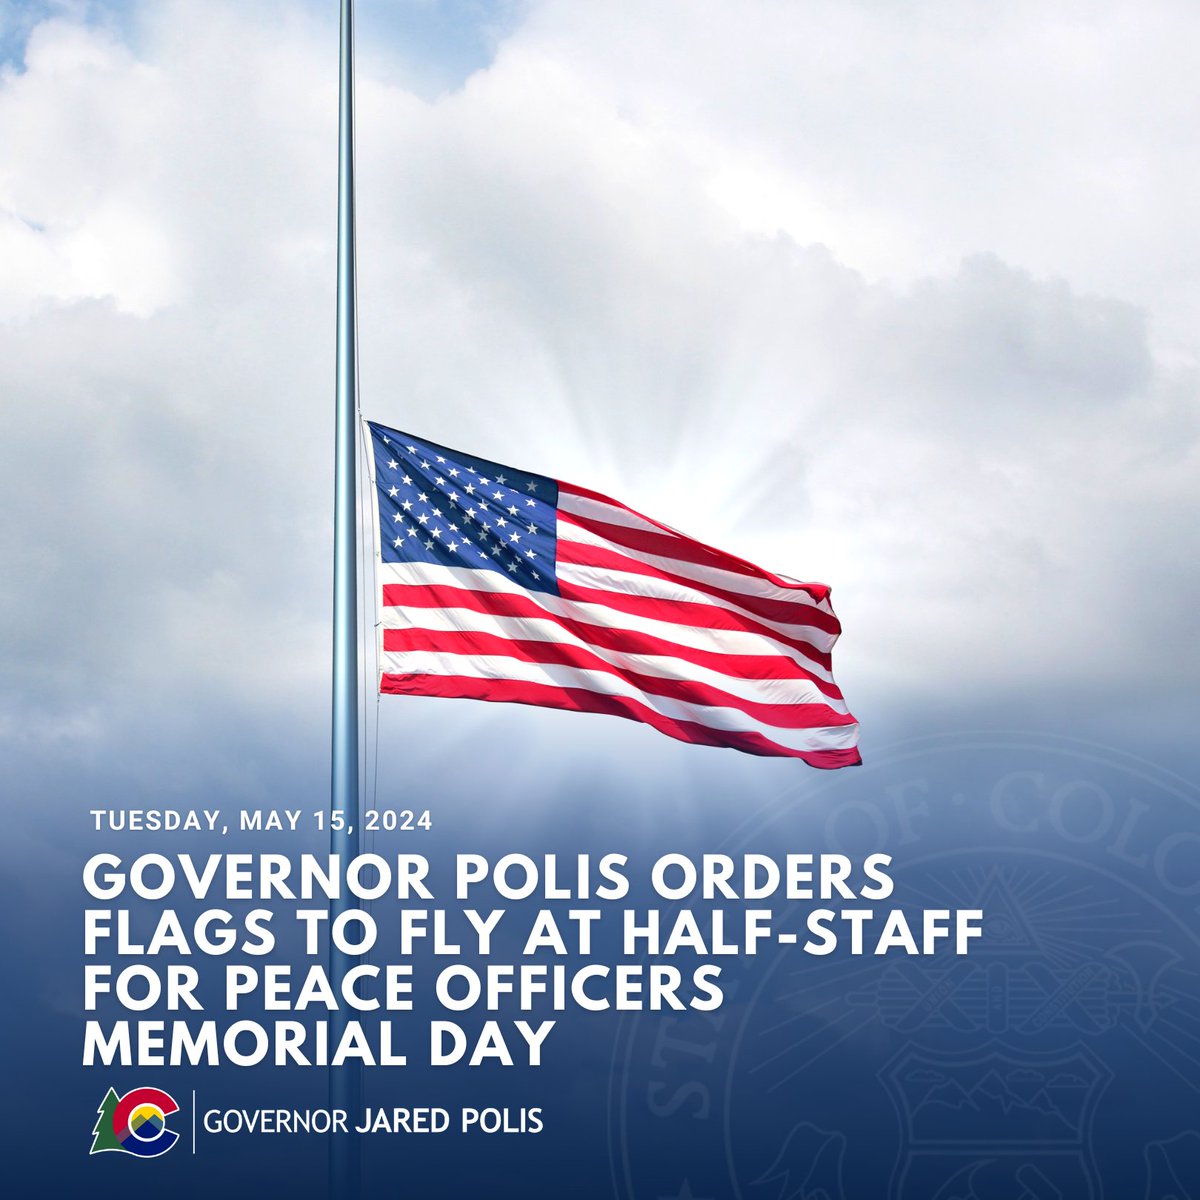 Today, I ordered flags to be flown at half-staff from sunrise to sunset on Wednesday, May 15, 2024, to honor the brave men and women who have made the ultimate sacrifice to protect our communities. We are forever grateful for their service and commitment to keeping Colorado safe.